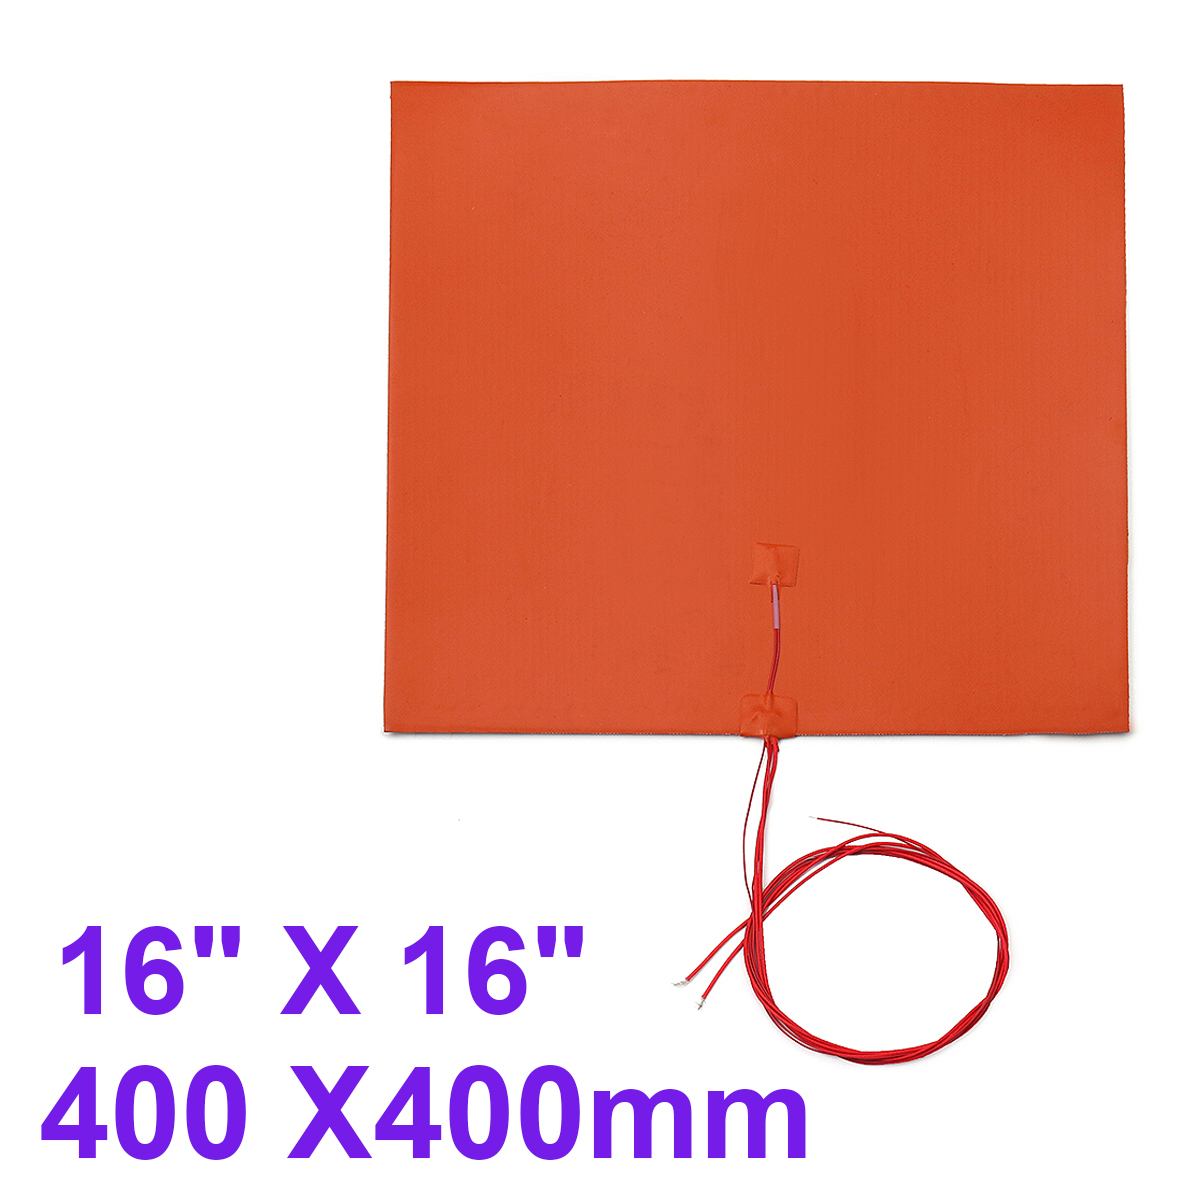 1400w 240V 400*400mm Silicone Heater Bed Pad For 3D Printer Without Hole 6